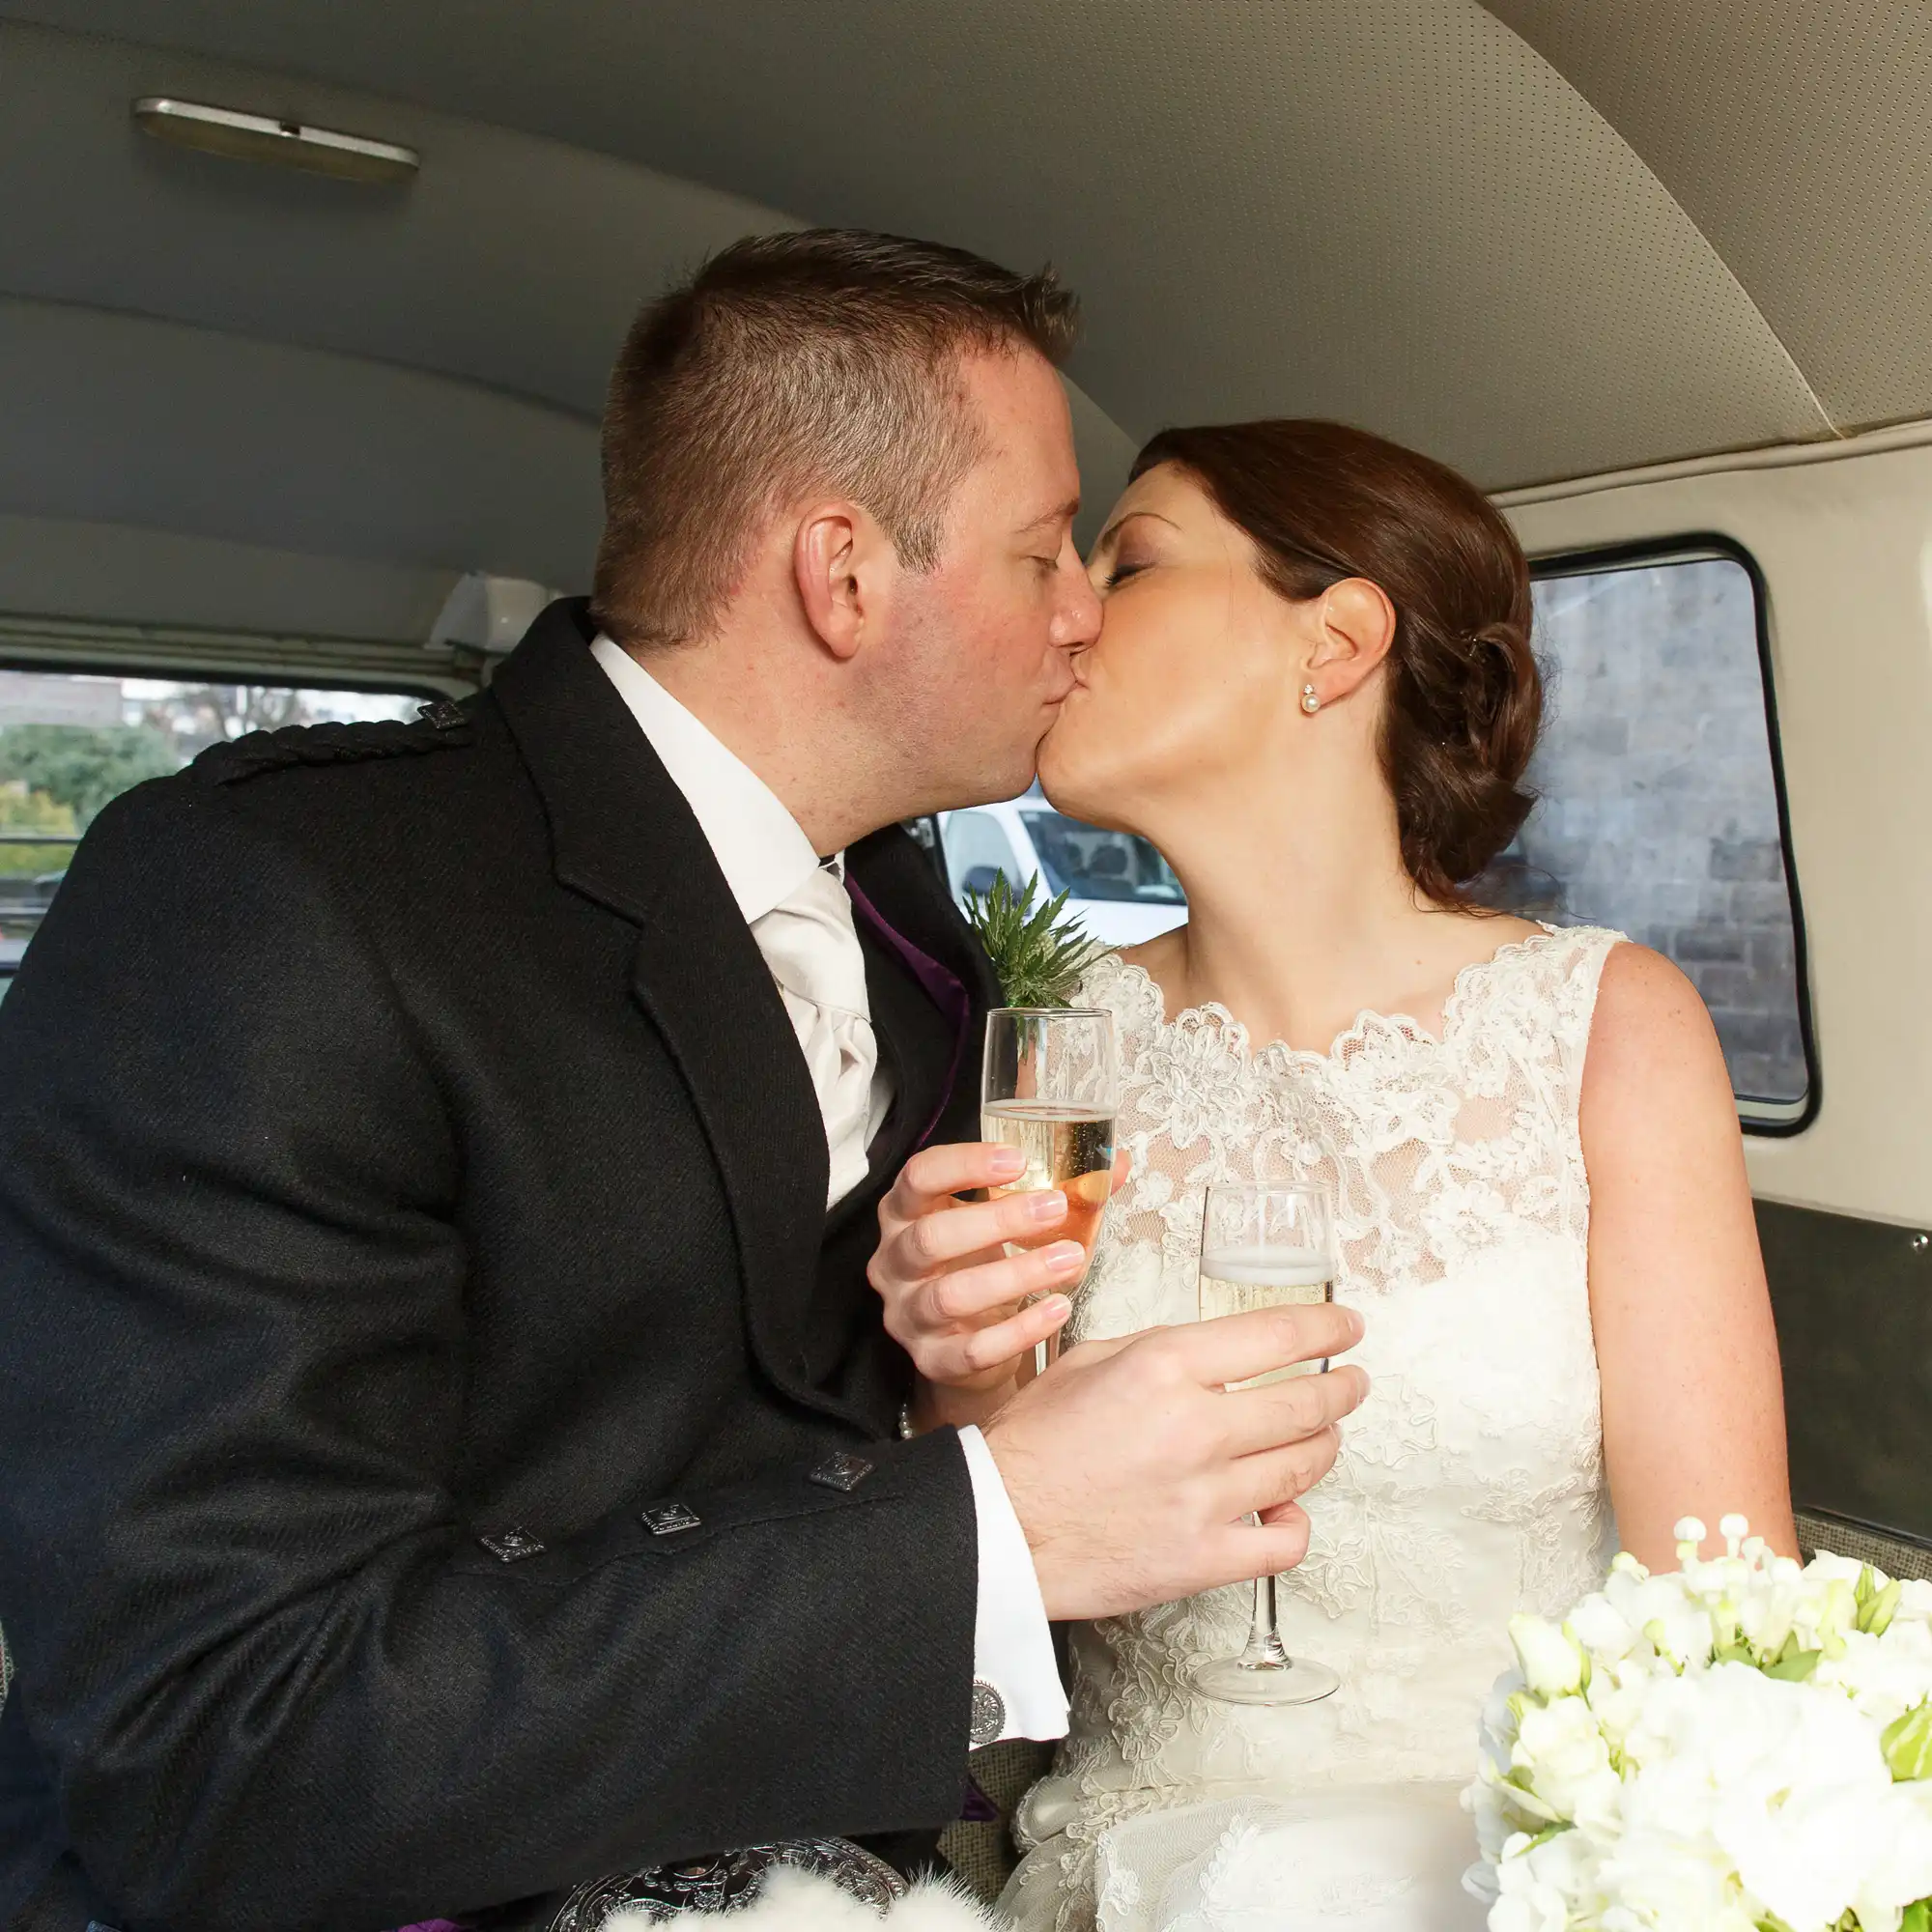 A bride and groom kissing inside a car, each holding a champagne glass, with natural light illuminating the scene.